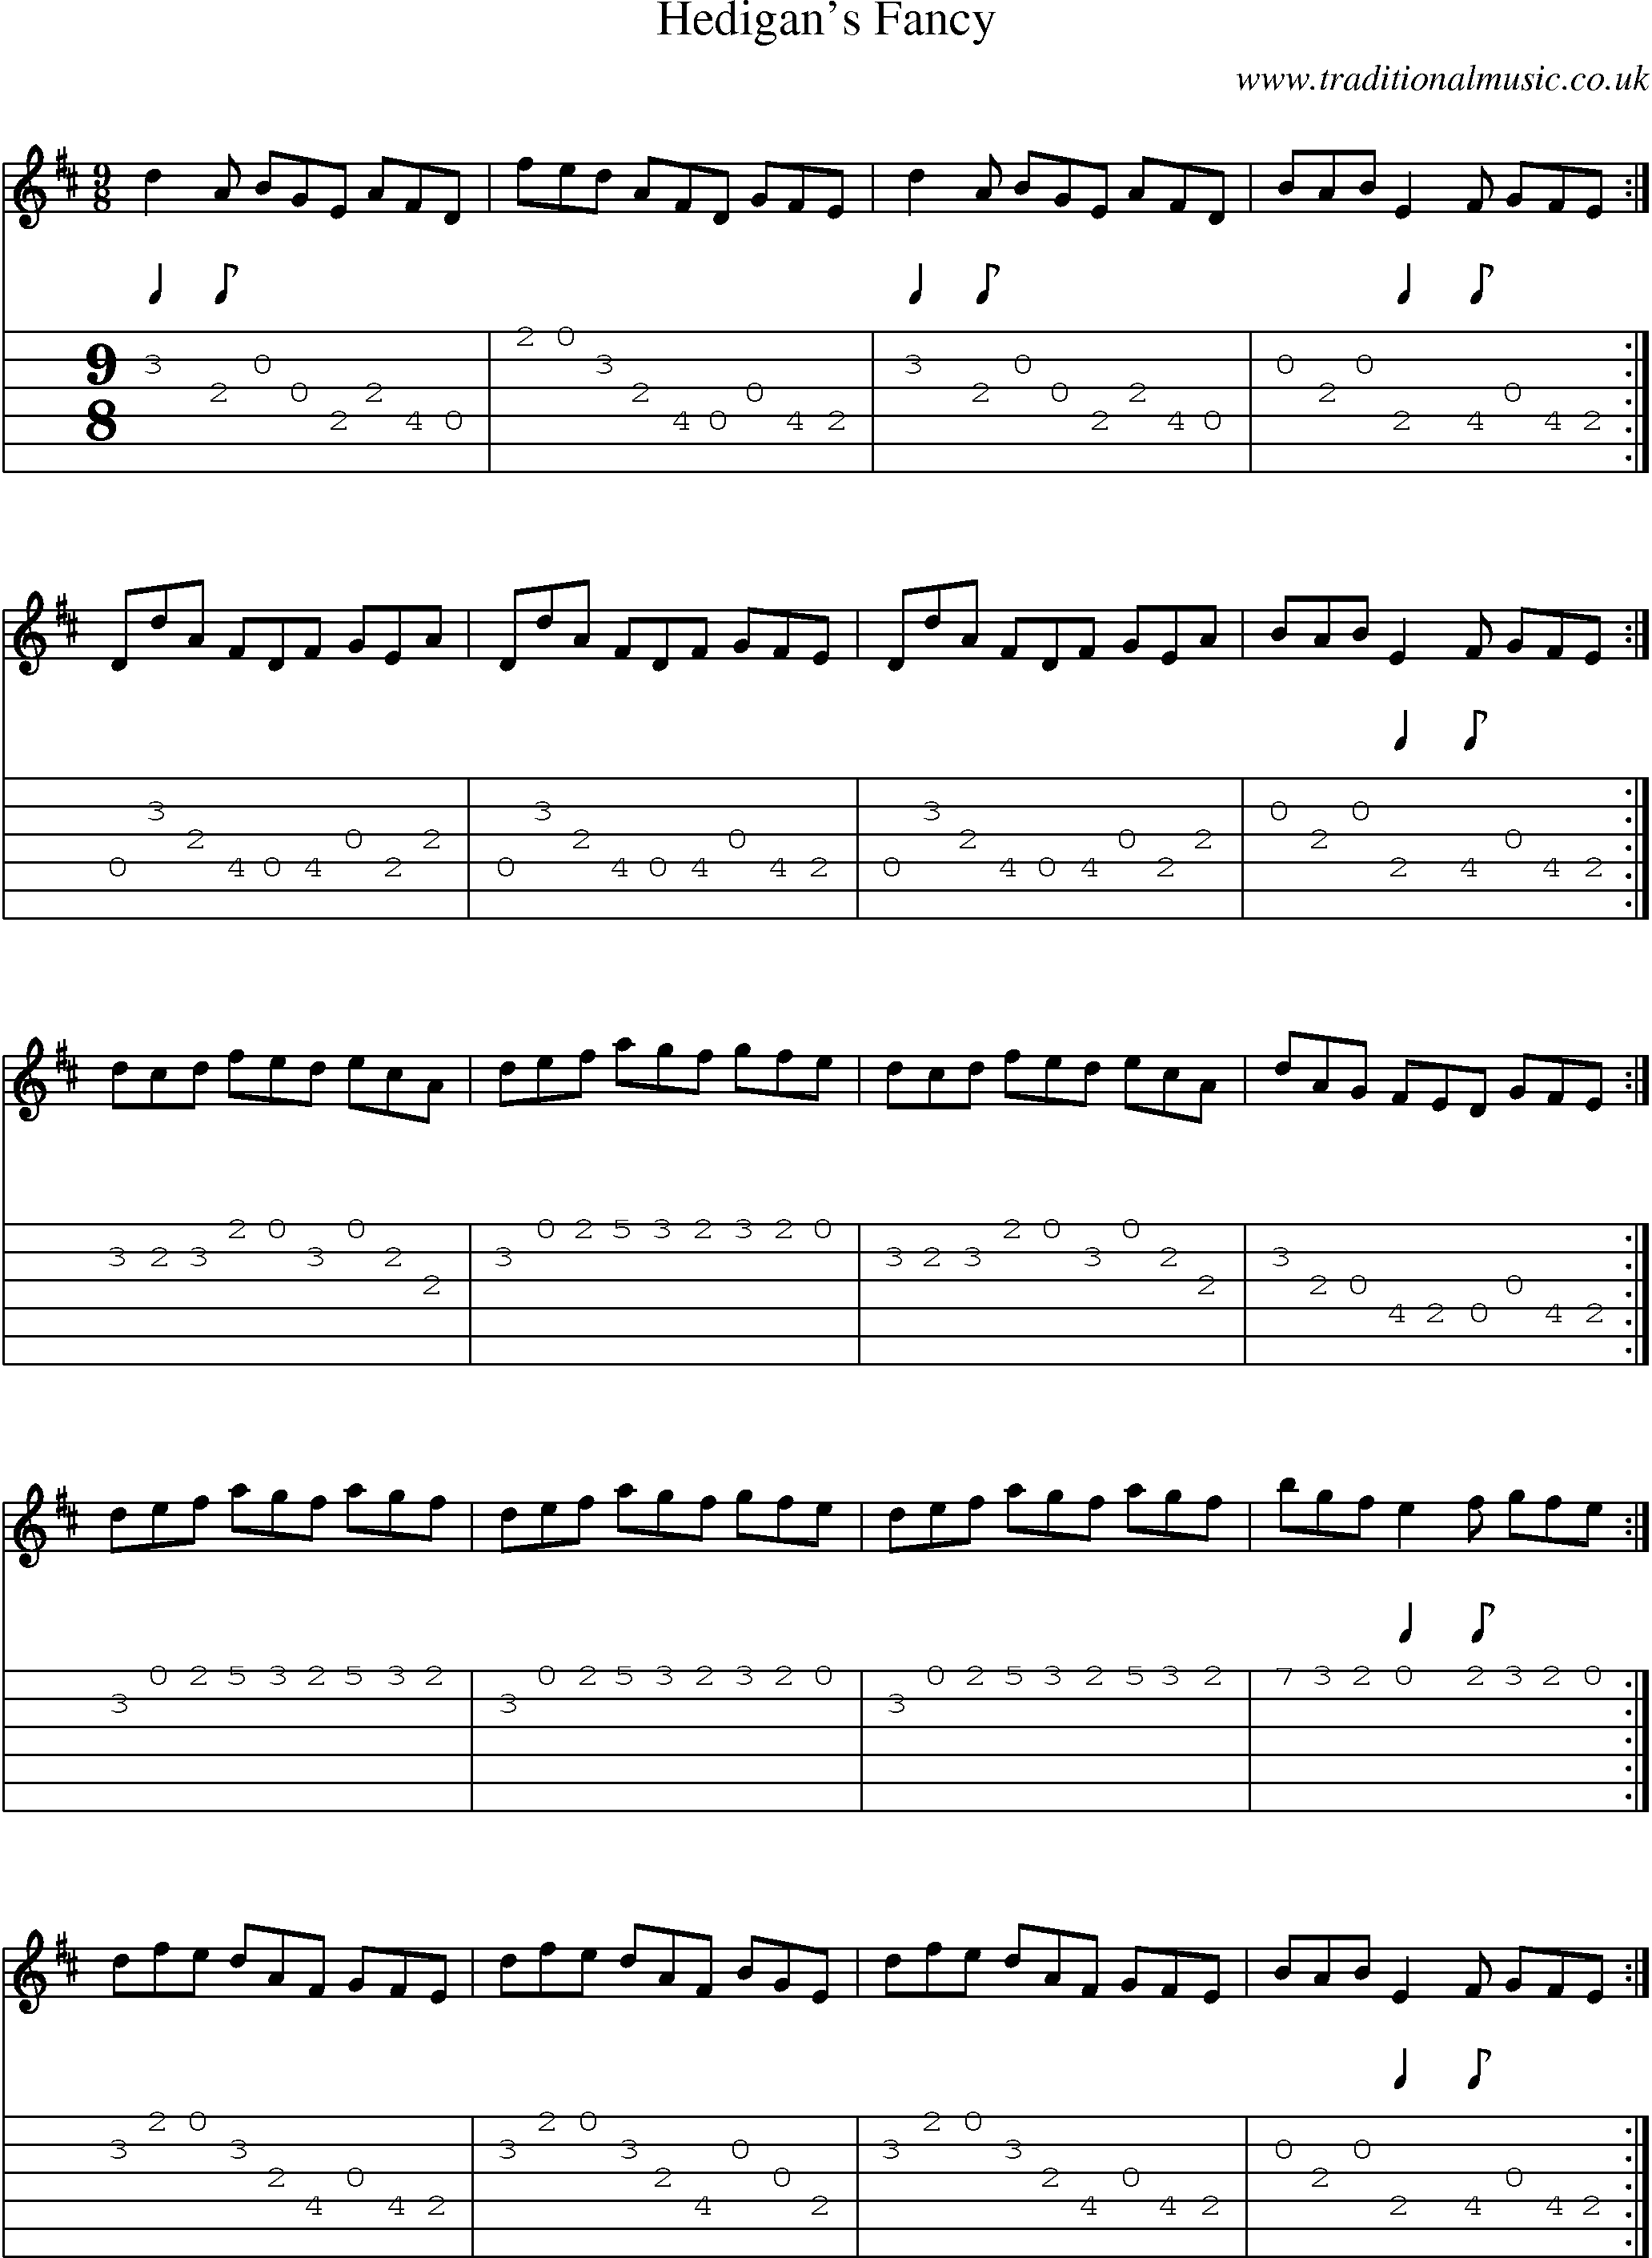 Music Score and Guitar Tabs for Hedigans Fancy